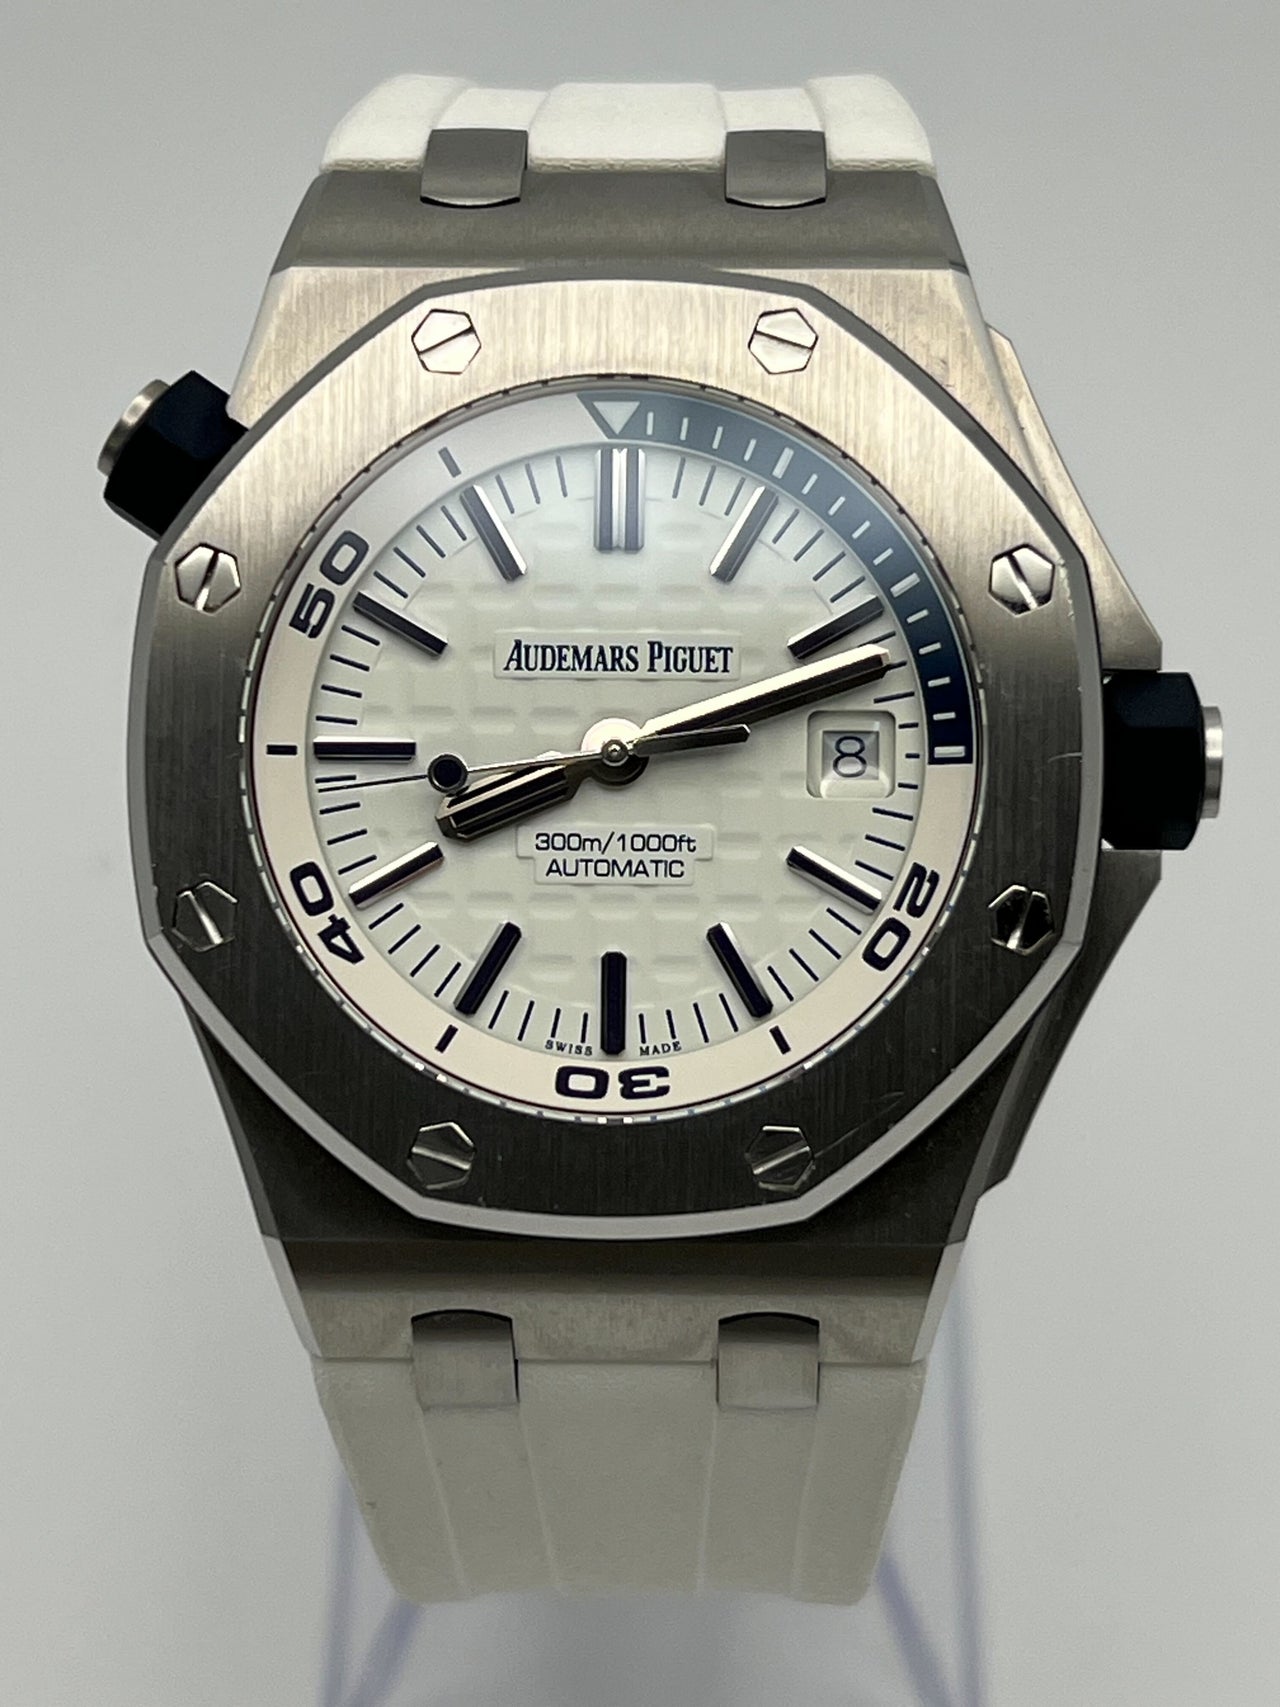 Audemars Piguet Royal Oak Offshore Diver Stainless Steel White Dial 15710ST.OO.A010CA.01